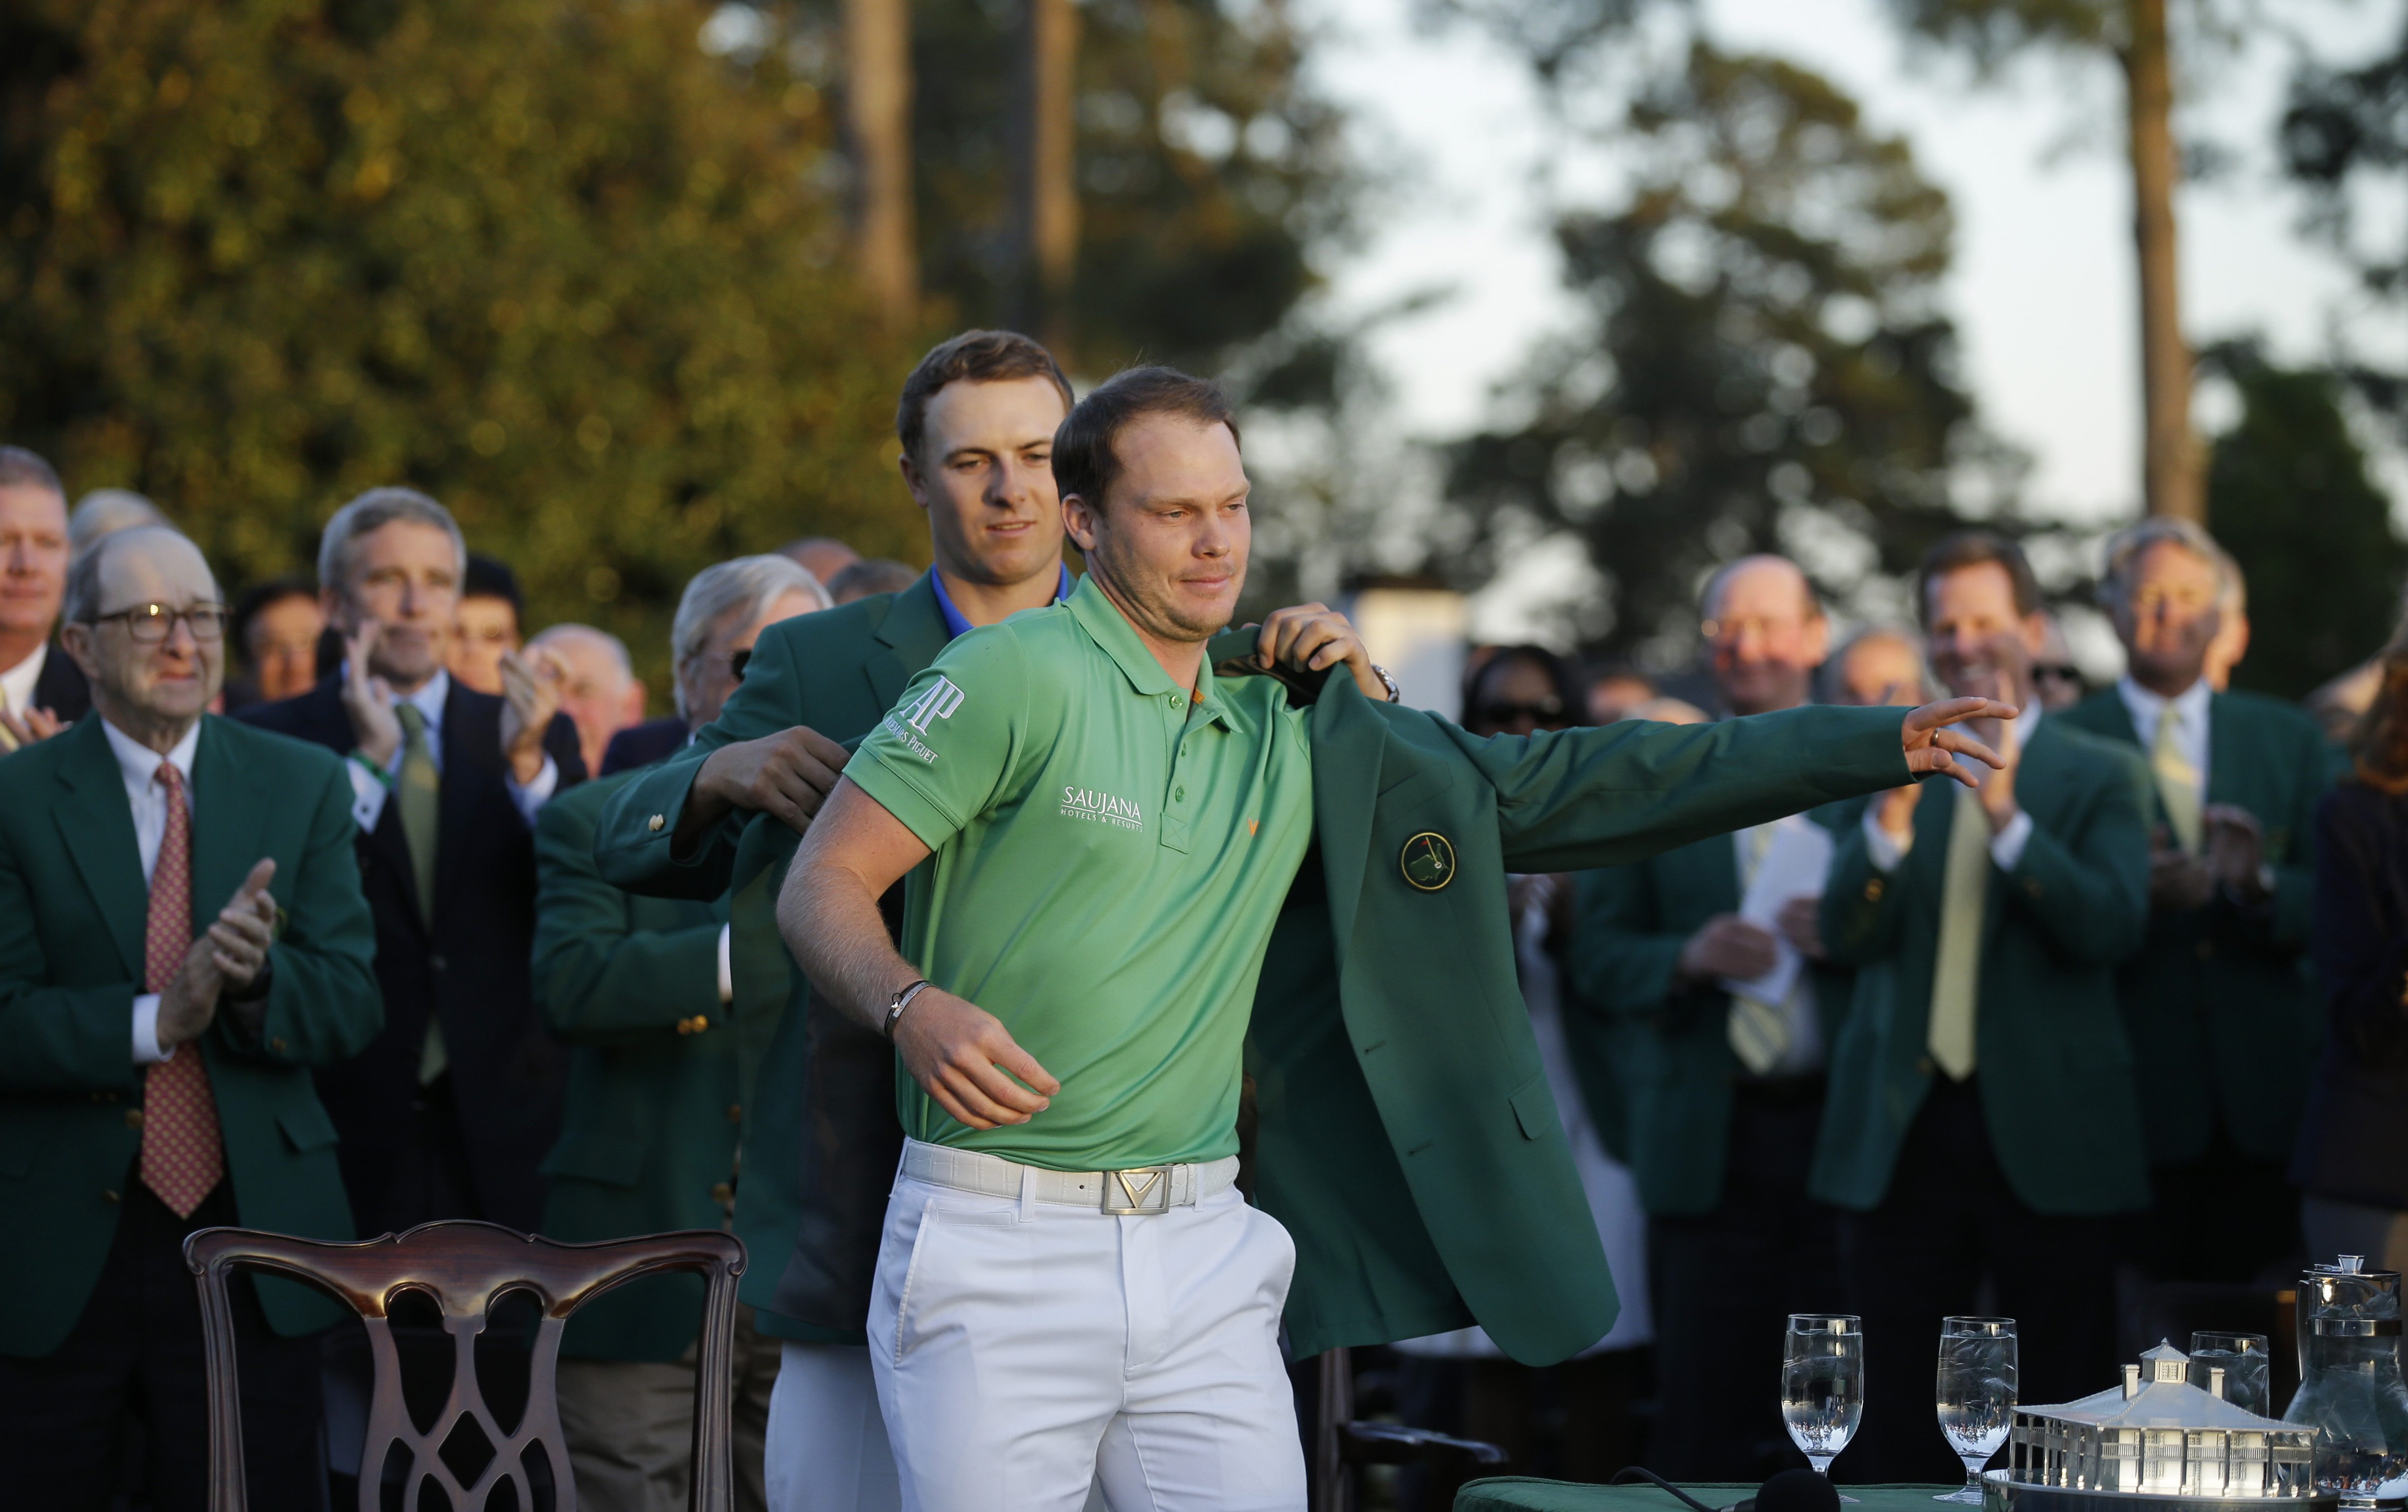 Defending champion Jordan Spieth, left, helps 2016 Masters champion Danny Willett, of England, put on his green jacket following the final round of the Masters golf tournament Sunday, April 10, 2016, in Augusta, Ga.